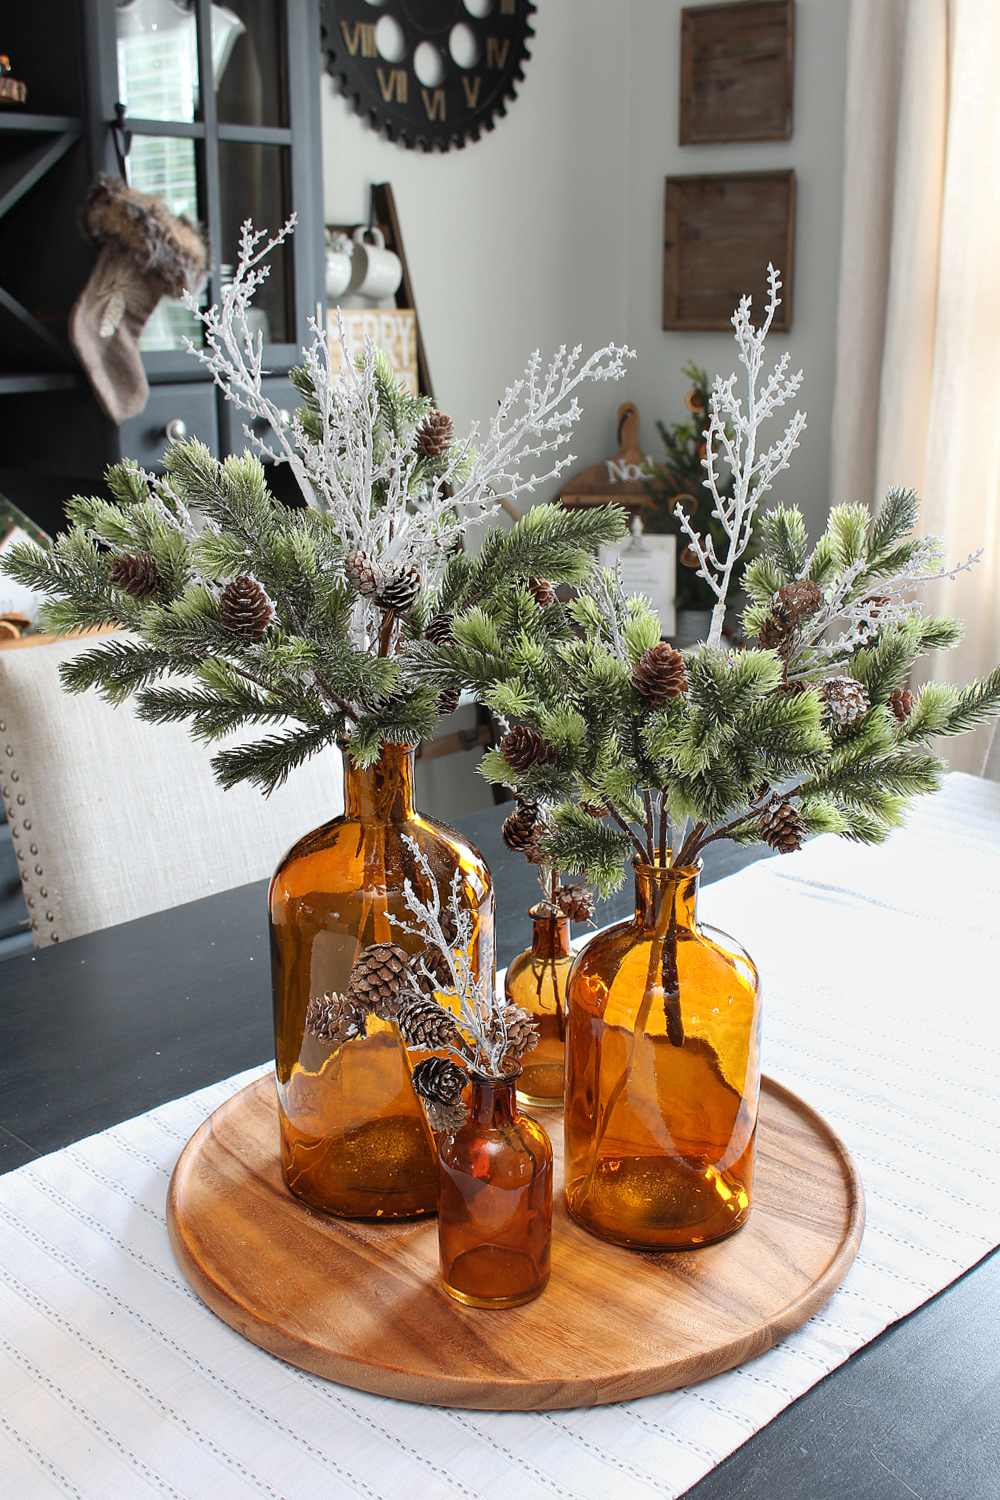 Pretty Christmas centerpiece with amber glass bottled and greenery.